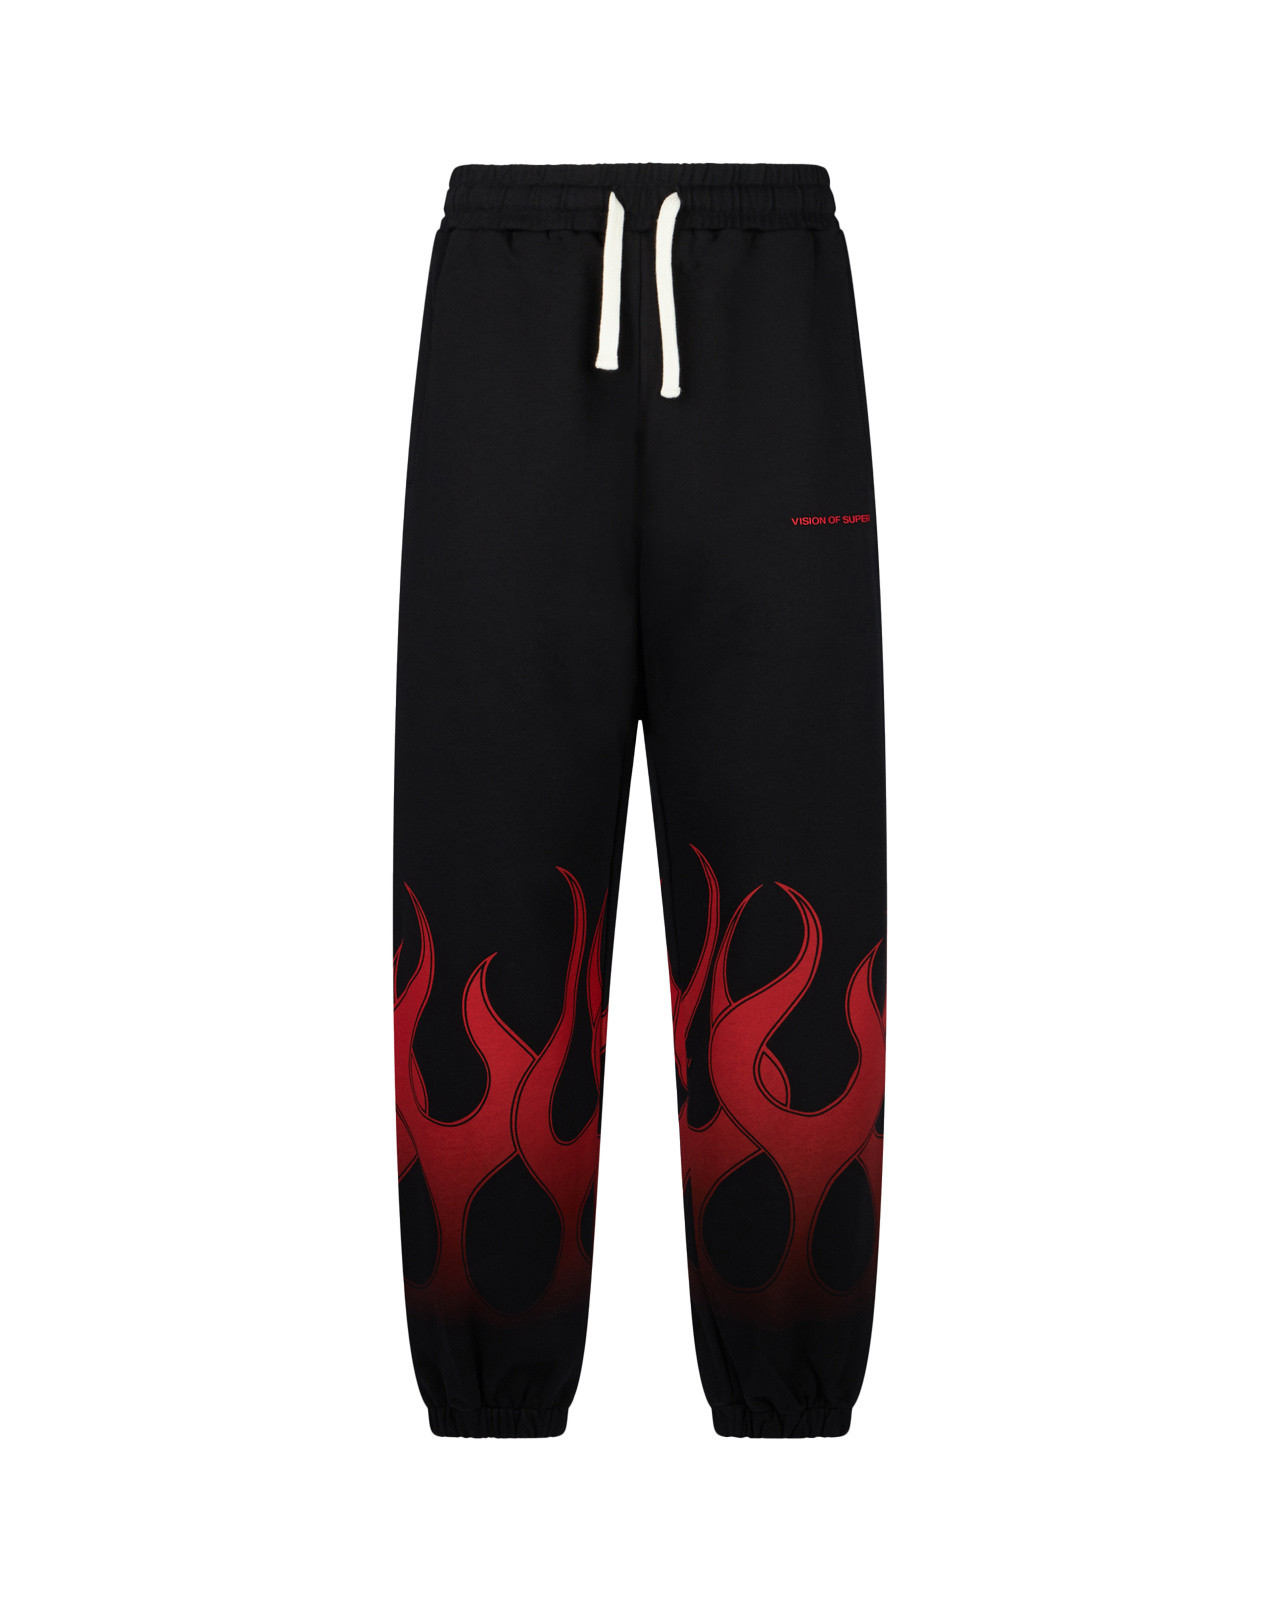 Vision of Super - Pantaloni con fiamme racing, Nero, large image number 0